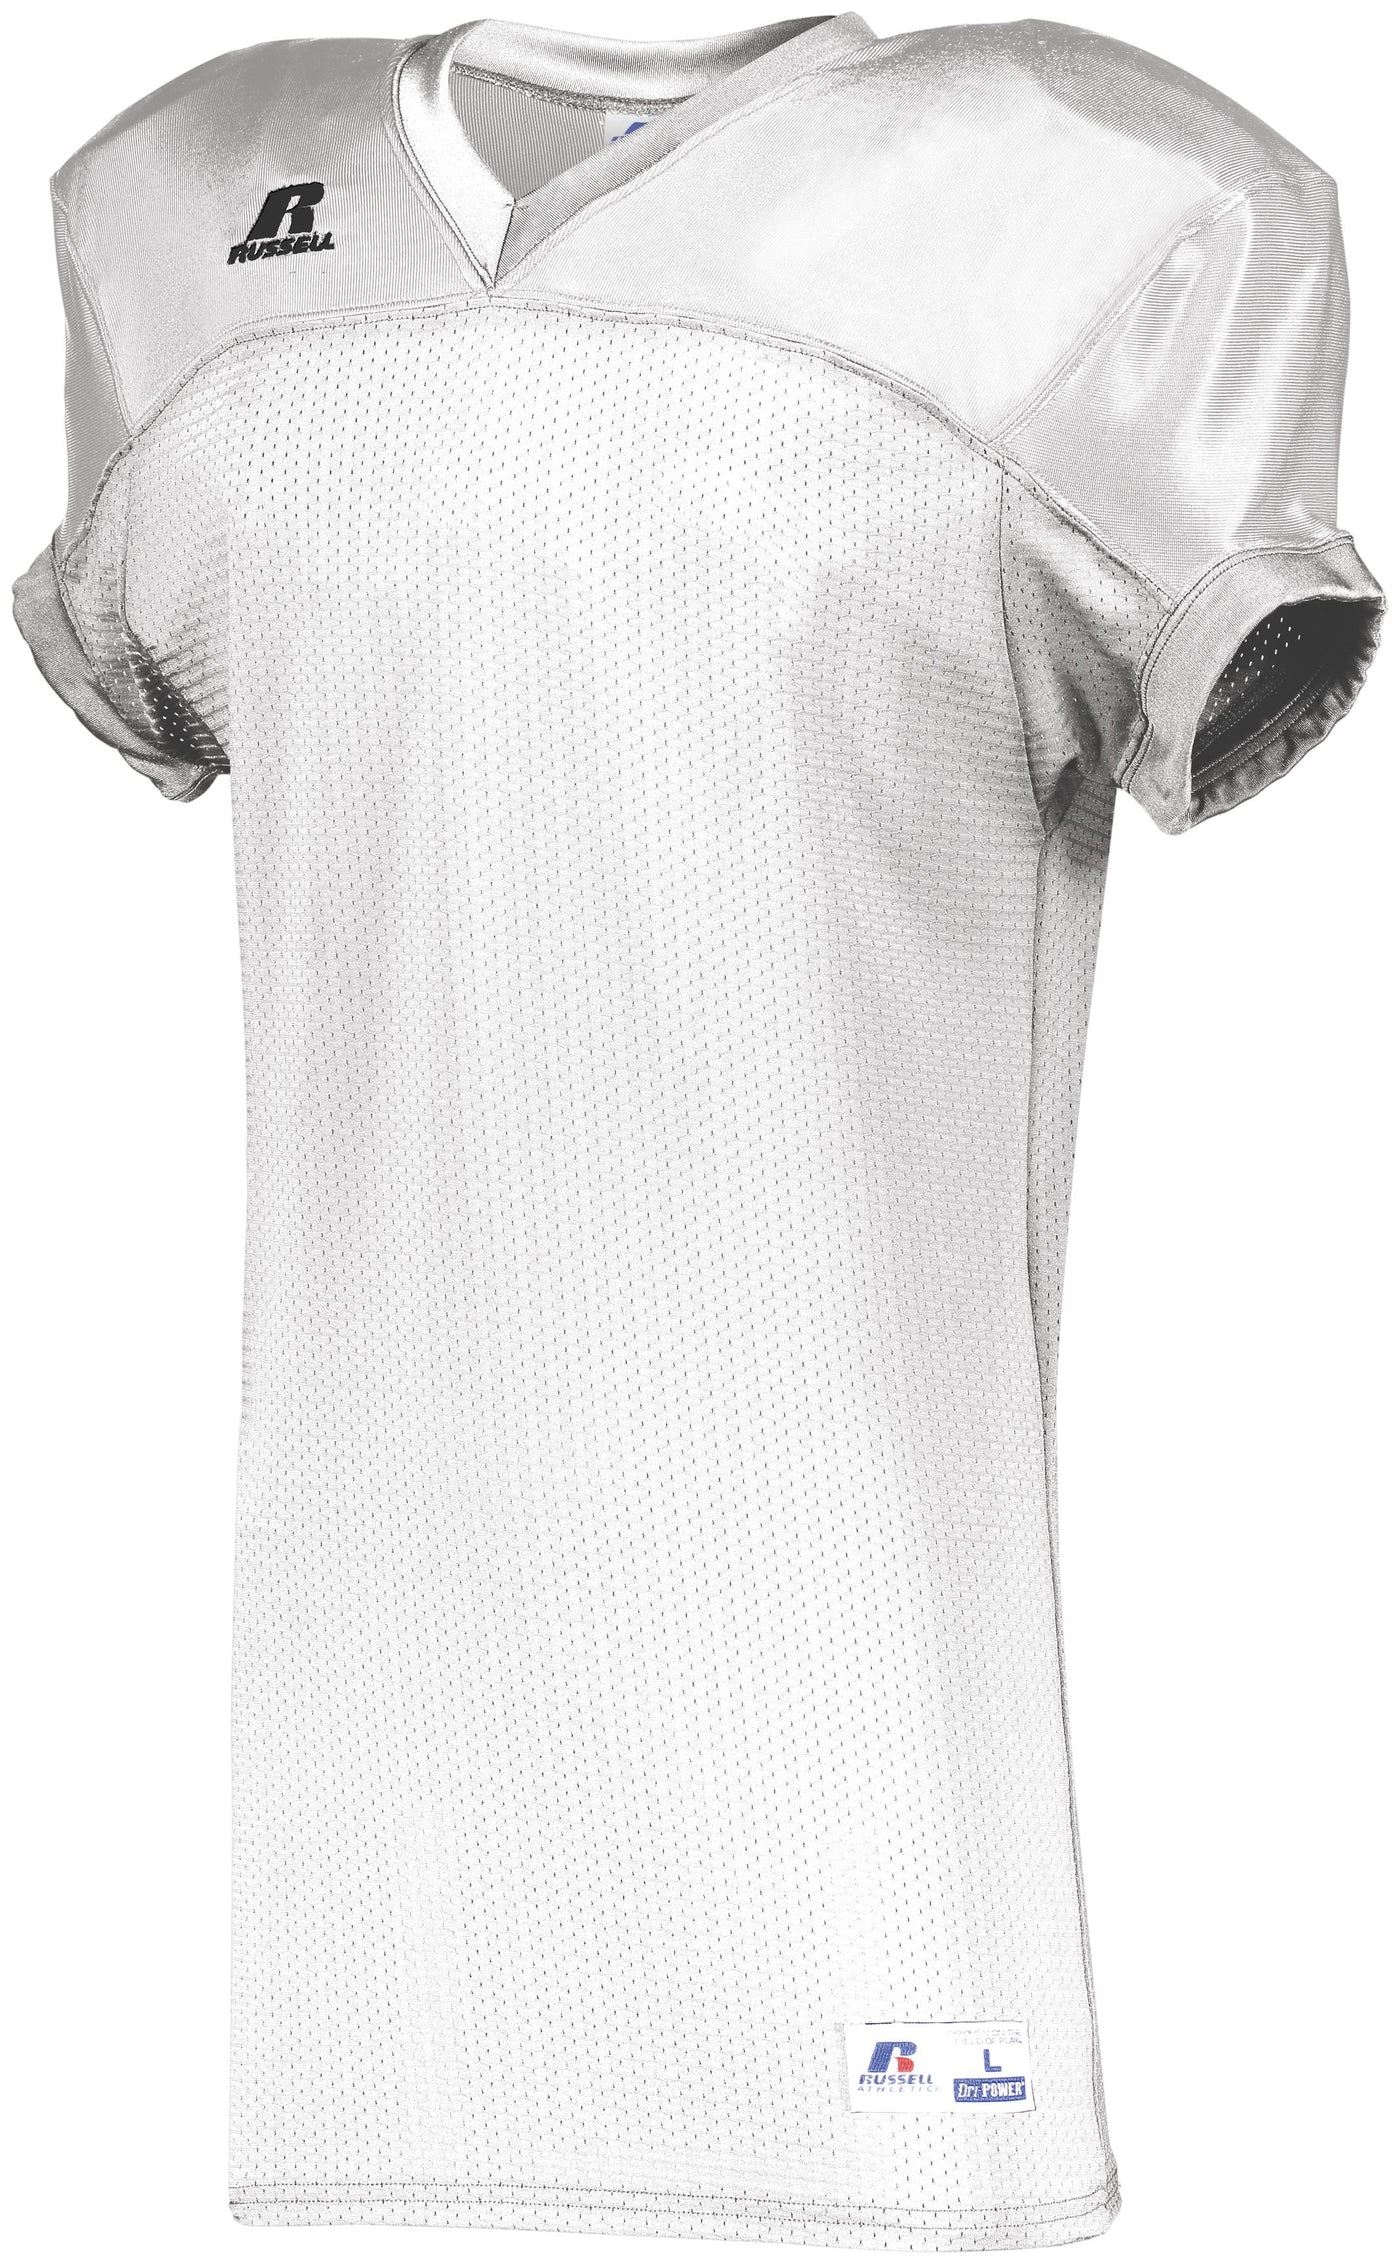 "RUSSELL TEAM STRETCH MESH GAME JERSEY: UNLEASH YOUR PERFORMANCE WITH SUPERIOR FLEXIBILITY"